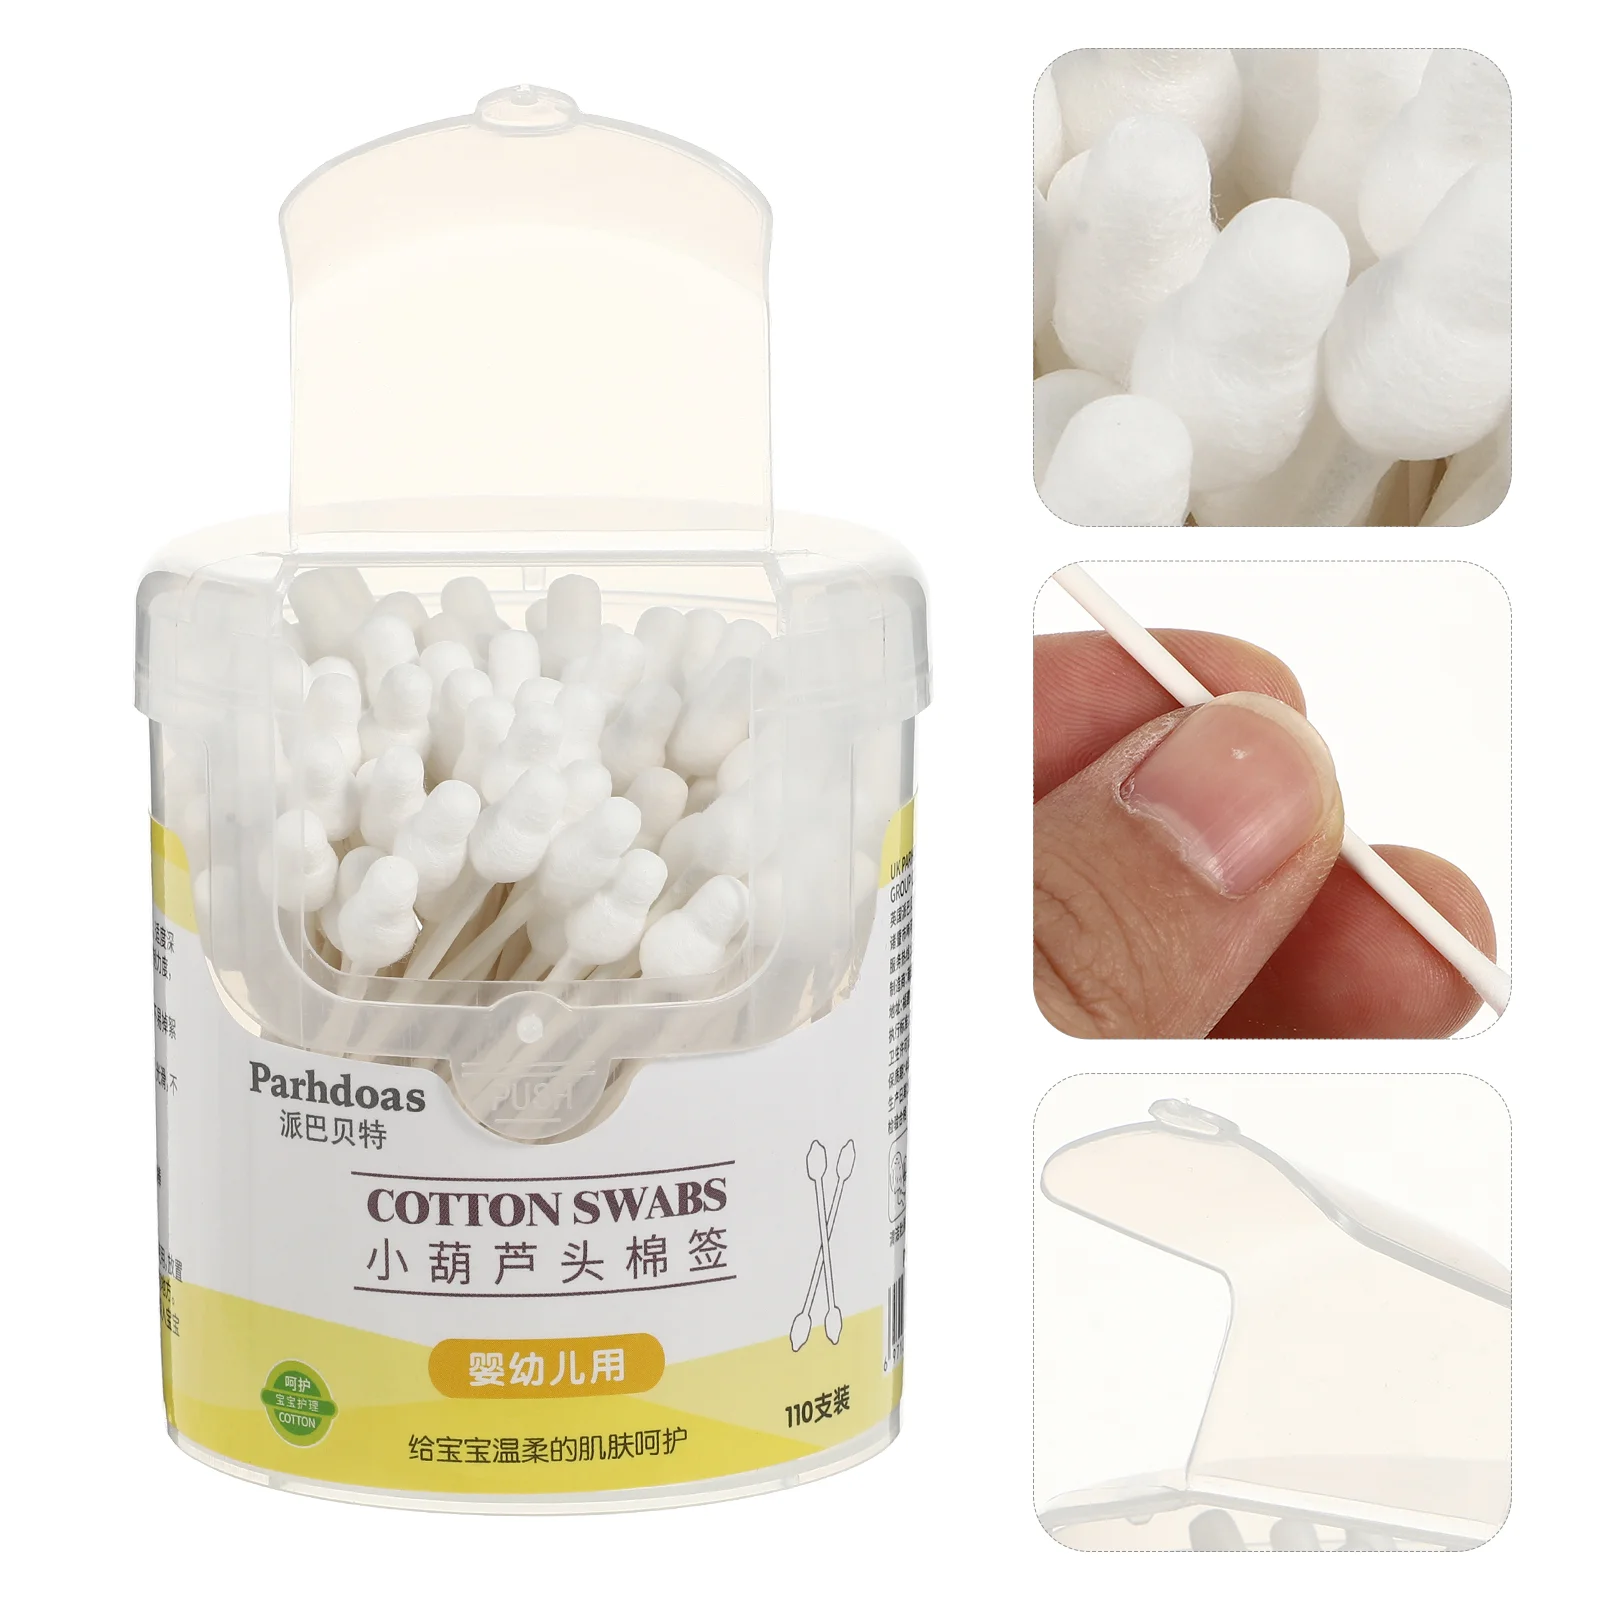 

Cotton Swabs Baby Buds Cleaning Swab Ear Qtip Organic Safety Earbuds Tipped Sterilecleaner Makeup Q Stick Applicator Tip